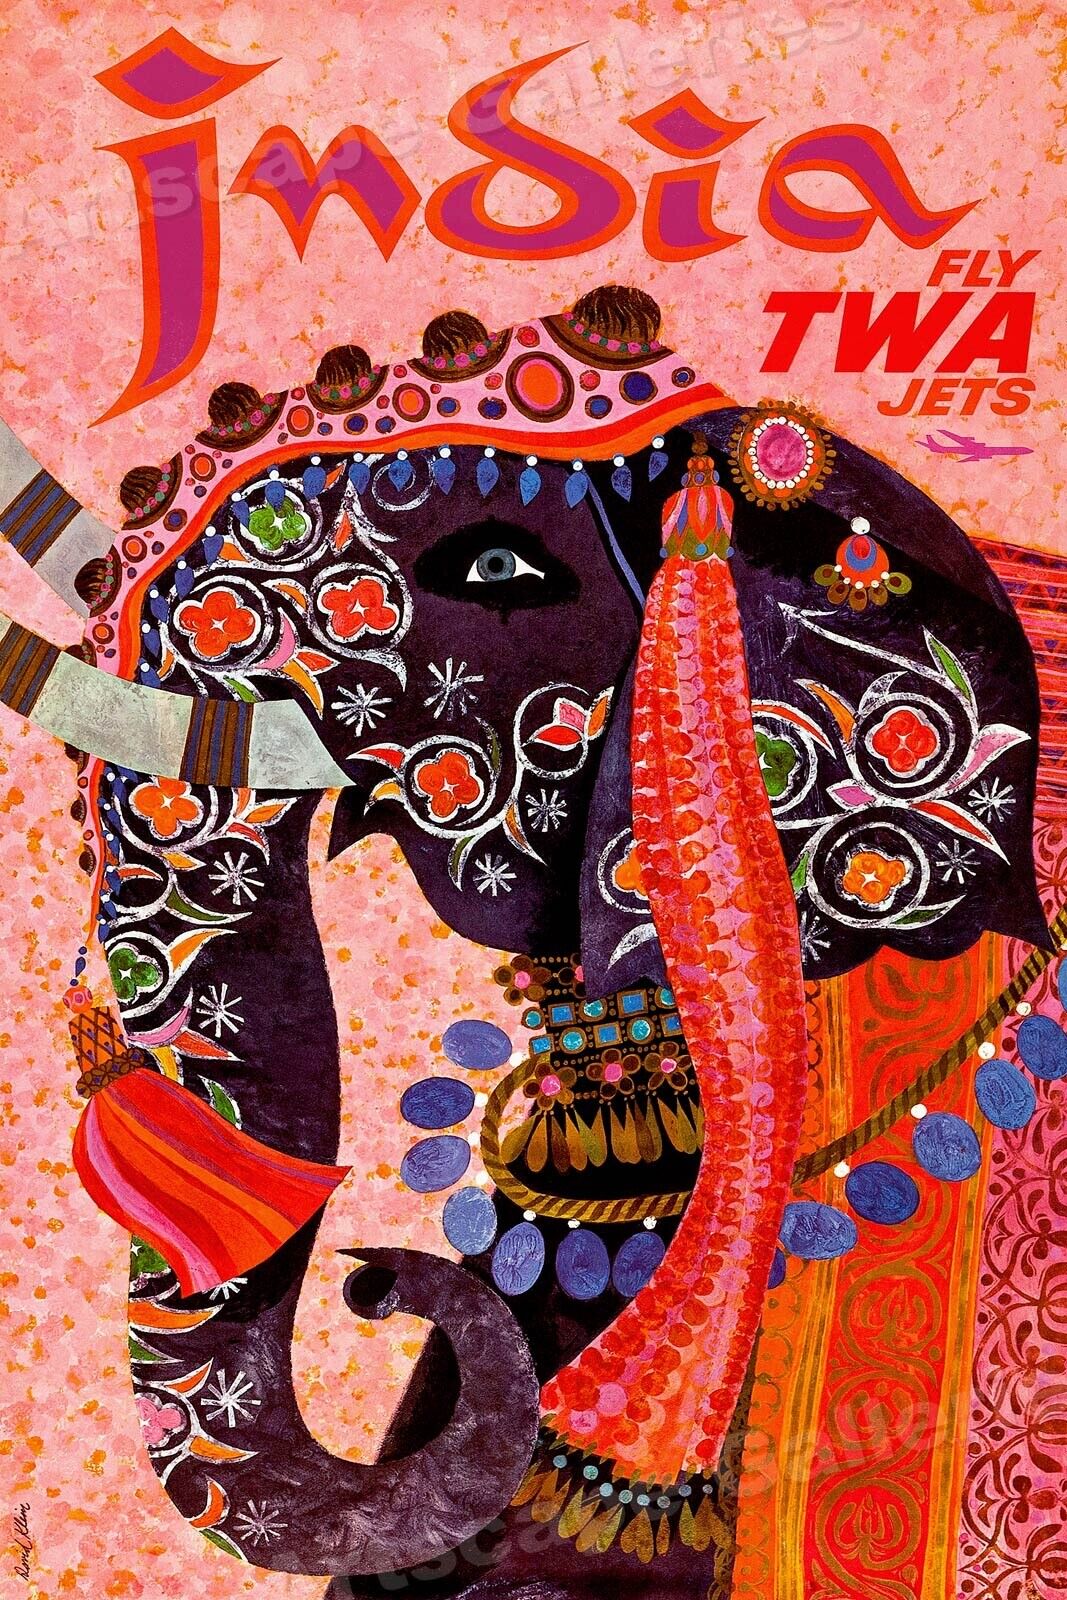 India Elephant 1960s Vintage Style Air Travel Poster - 24x36